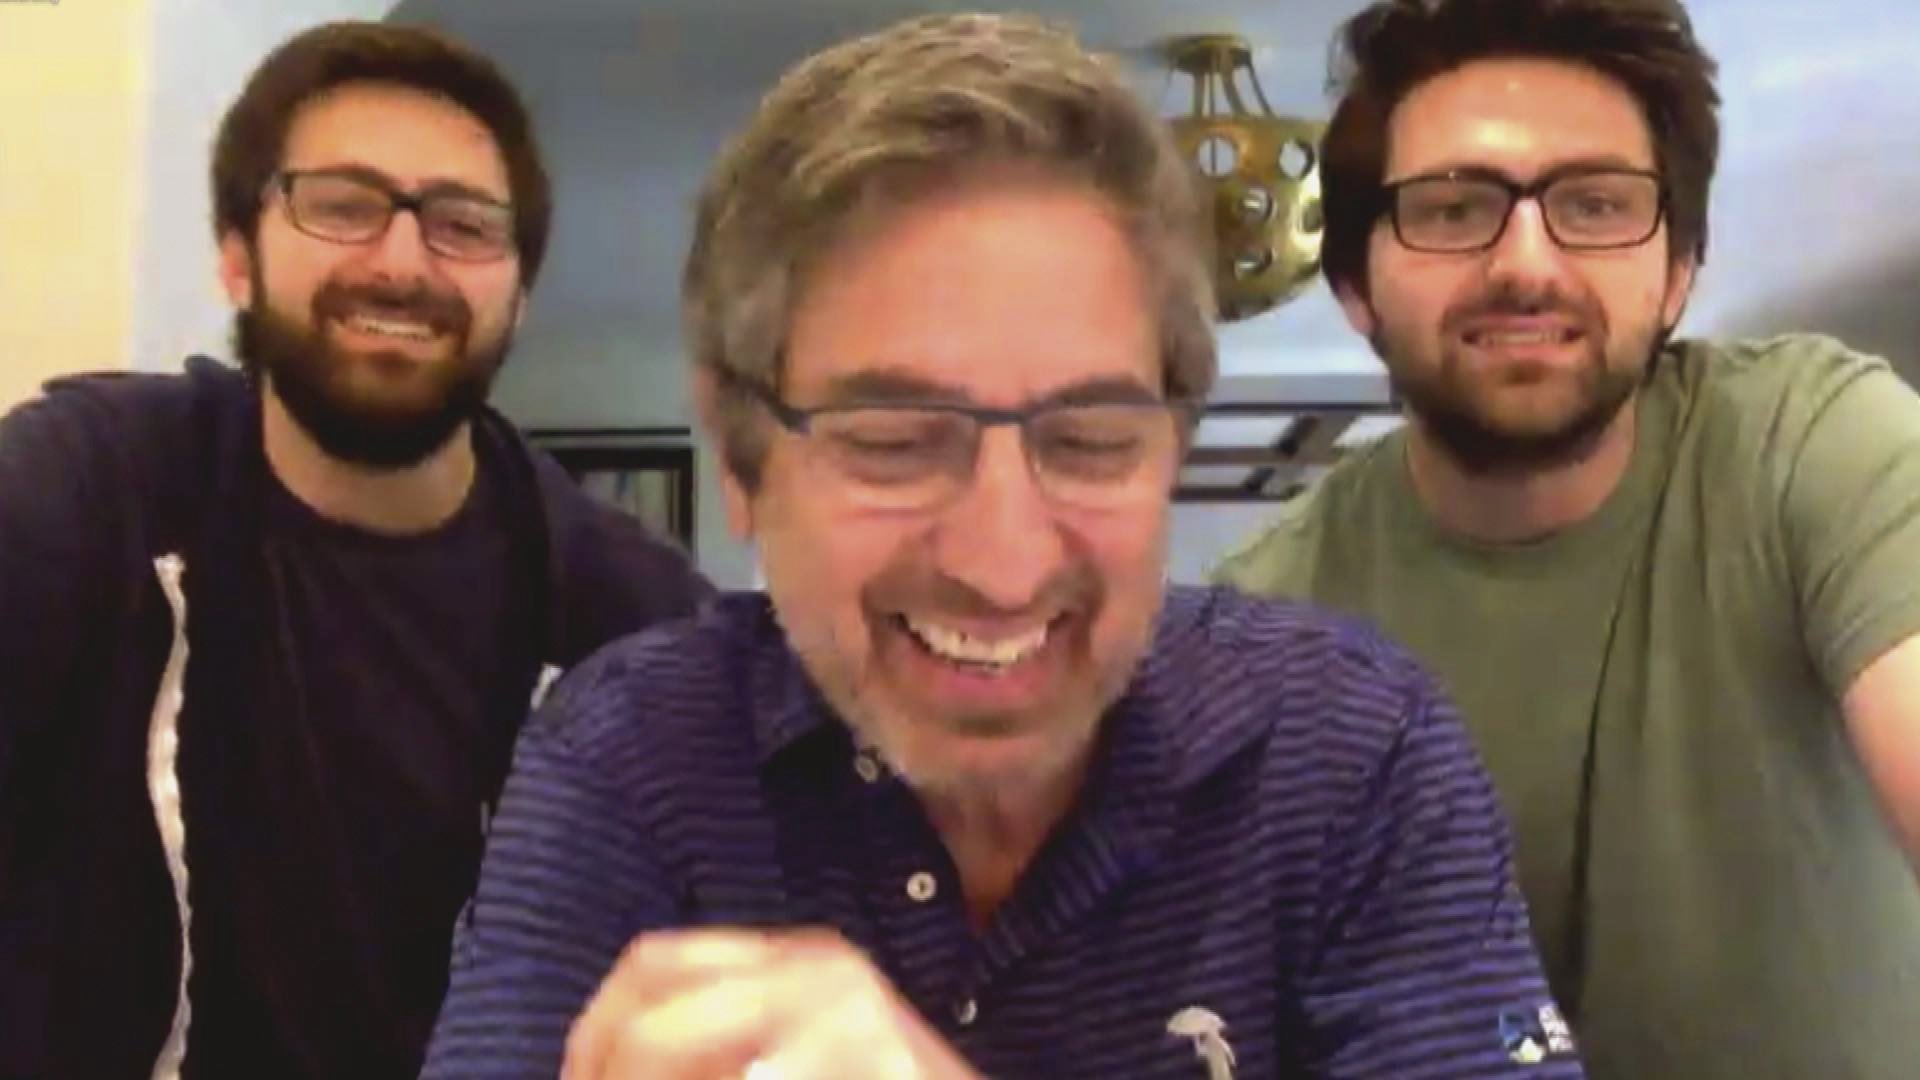 Ray Romano and his sons, Gregory and Matthew Romano, on "The Late Late Show with James Corden" on April 22, 2020 | Source: YouTube/The Late Late Show with James Corden